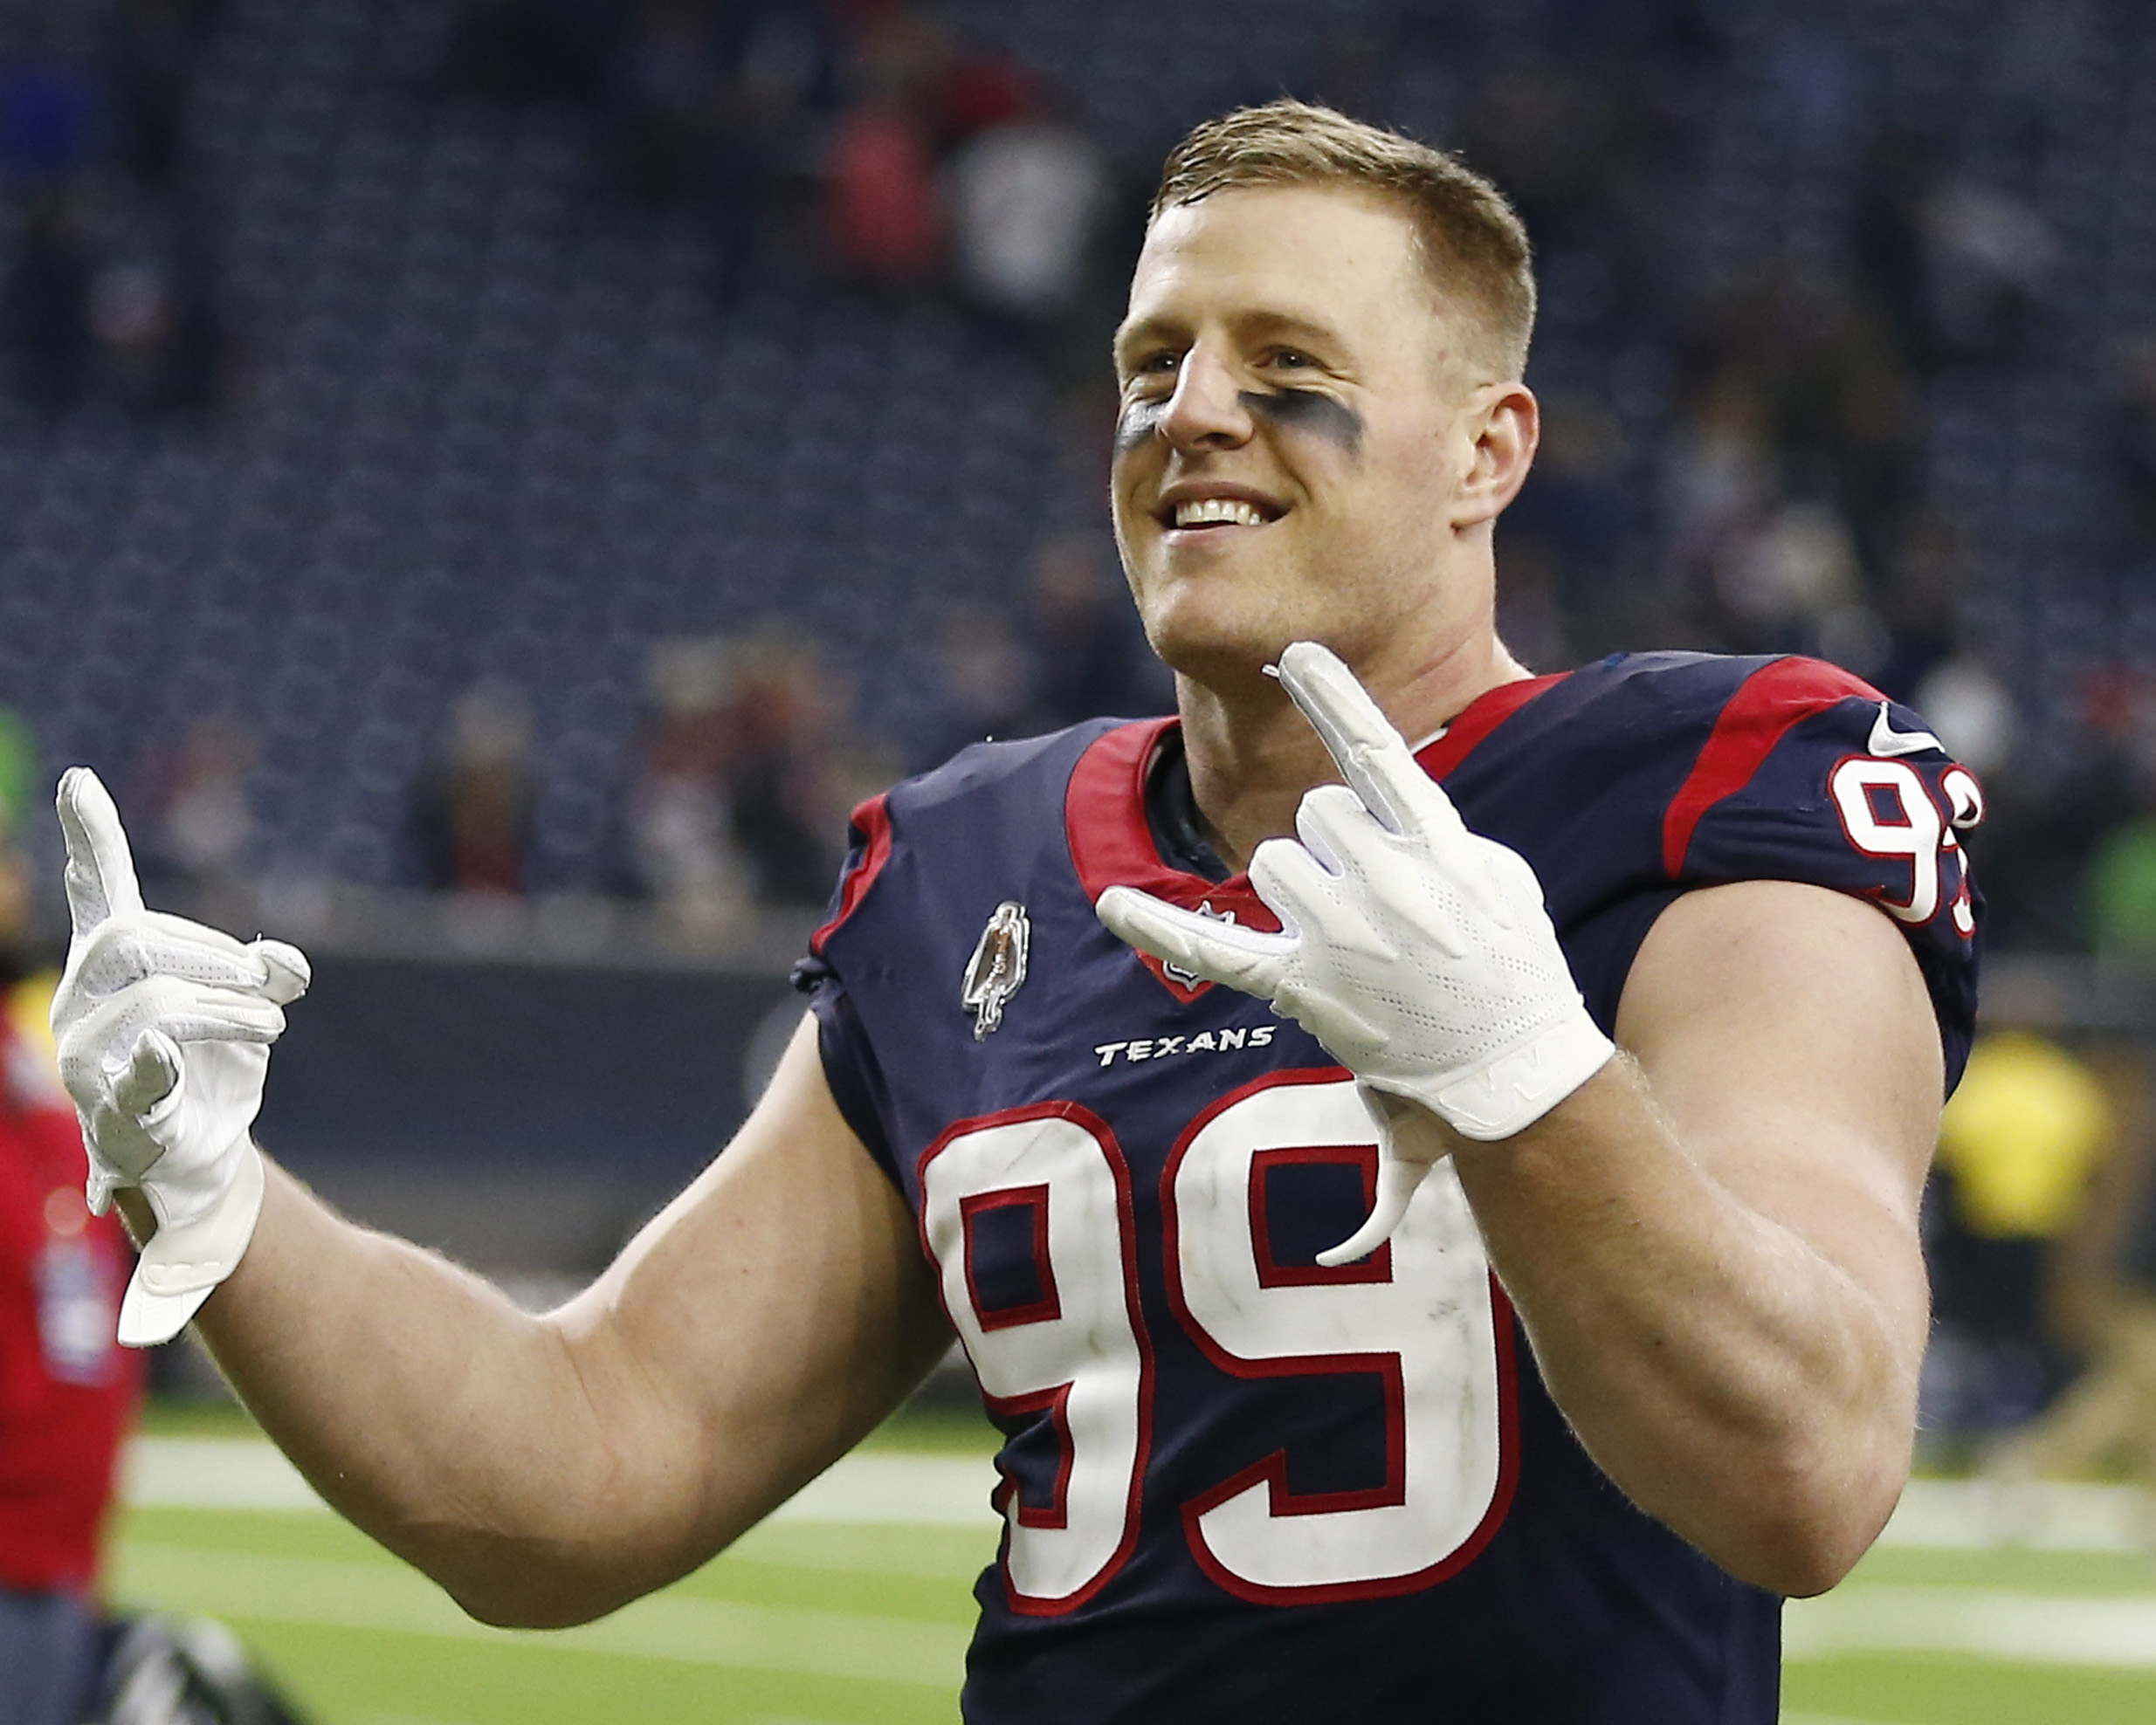 Nfl Star Jj Watt Calls On Fans To Chip In And Buy